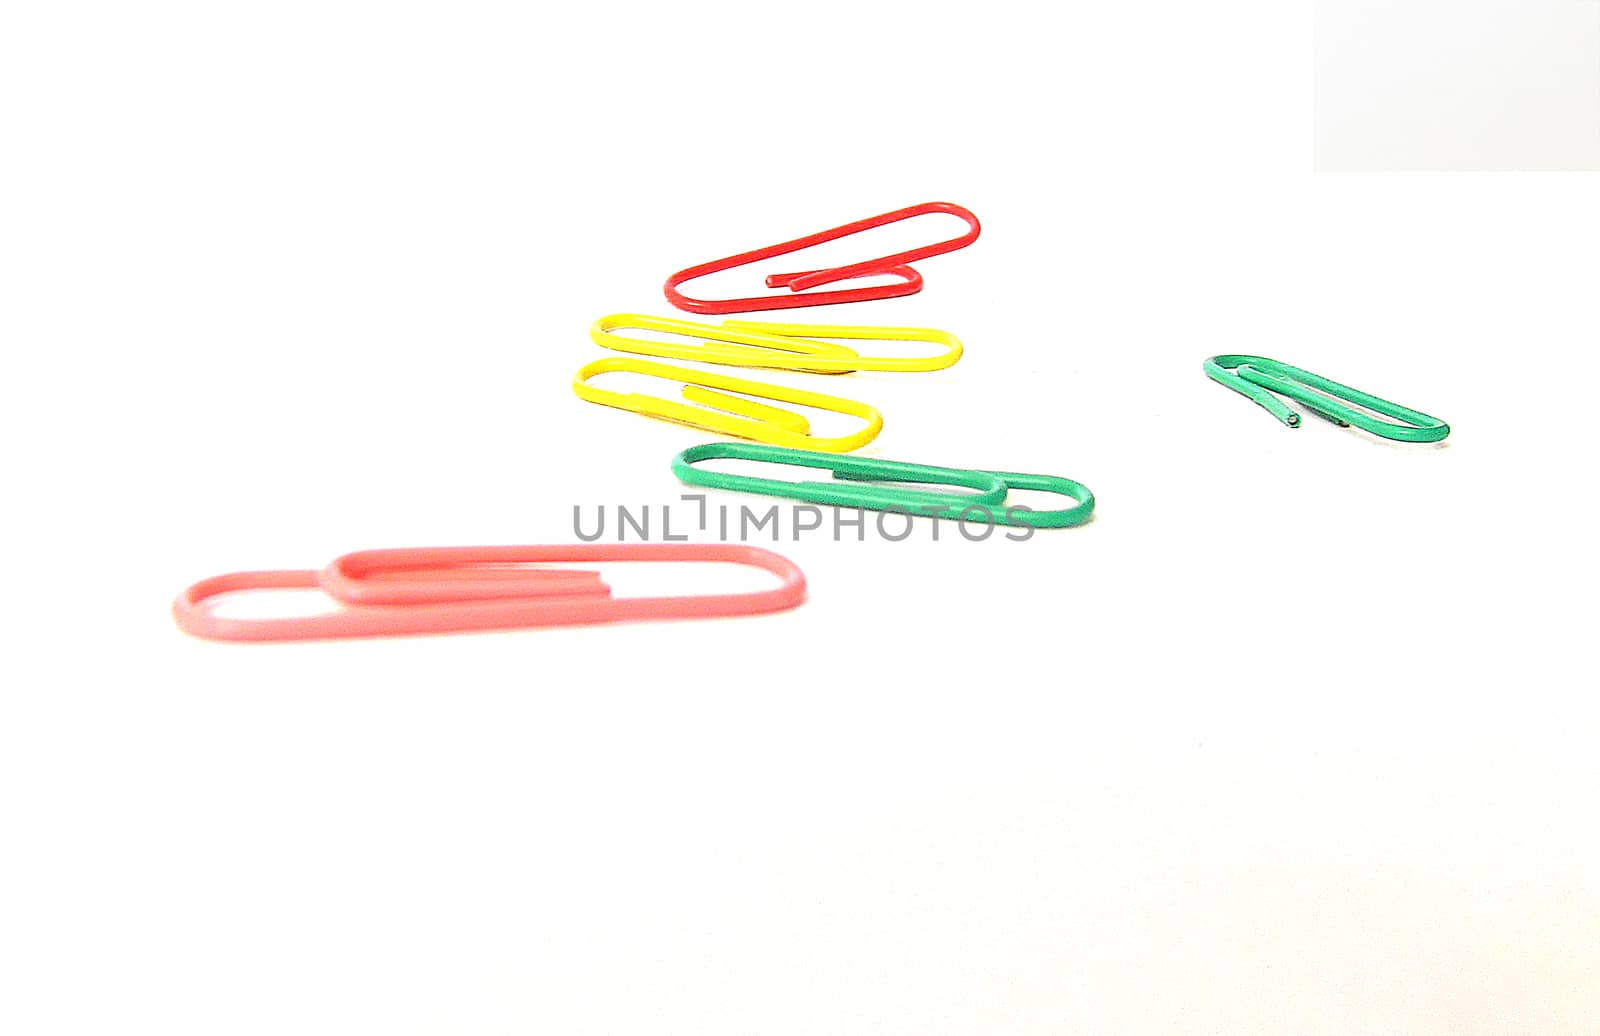 paper clips, items for the office and home plastic products by Grishakov